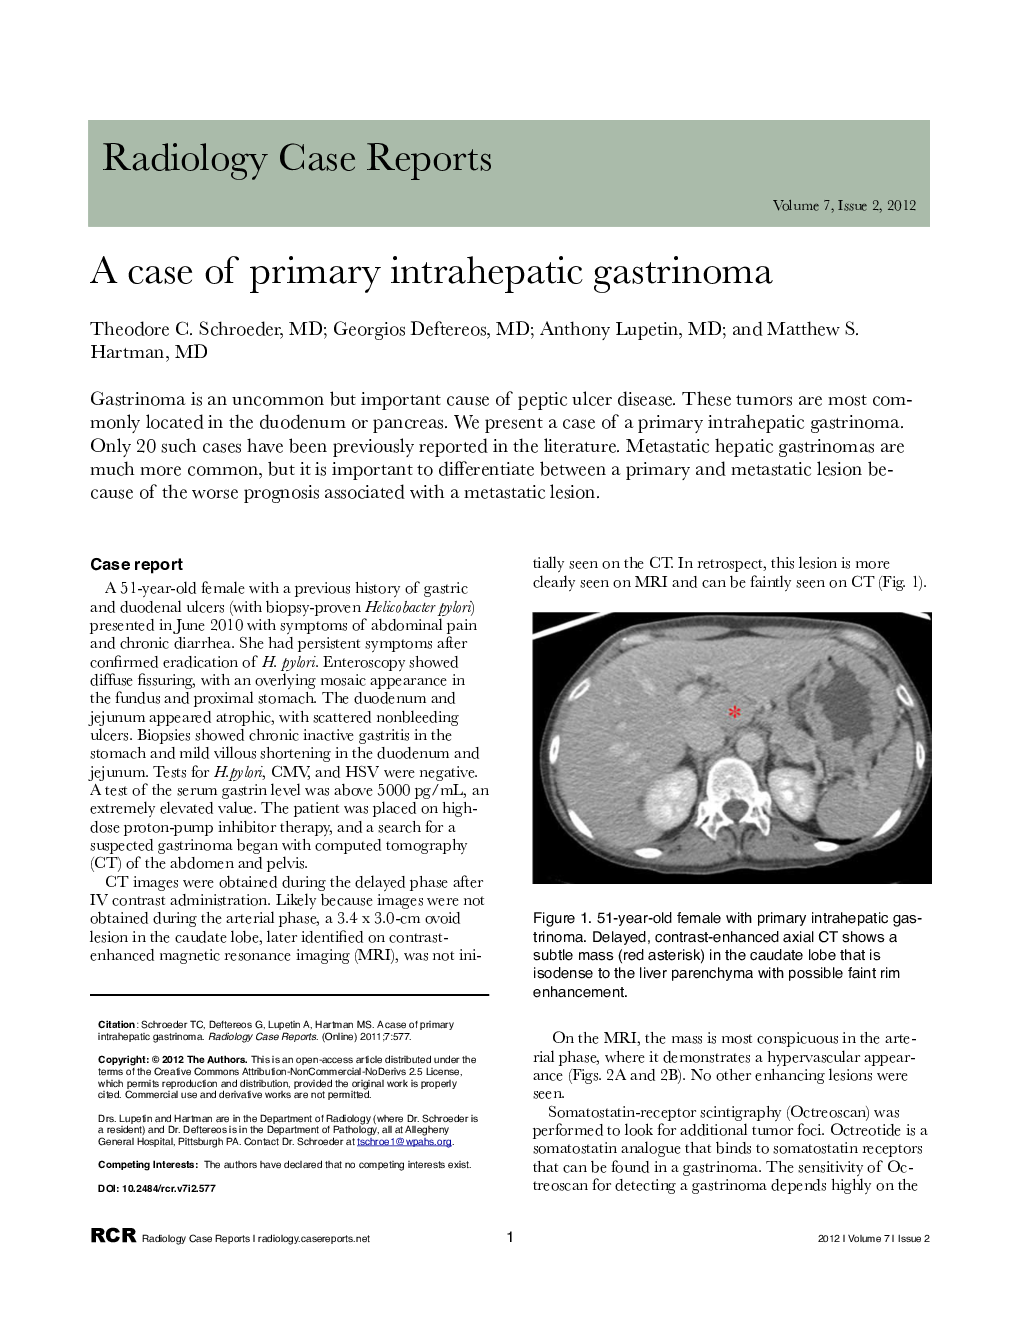 A case of primary intrahepatic gastrinoma